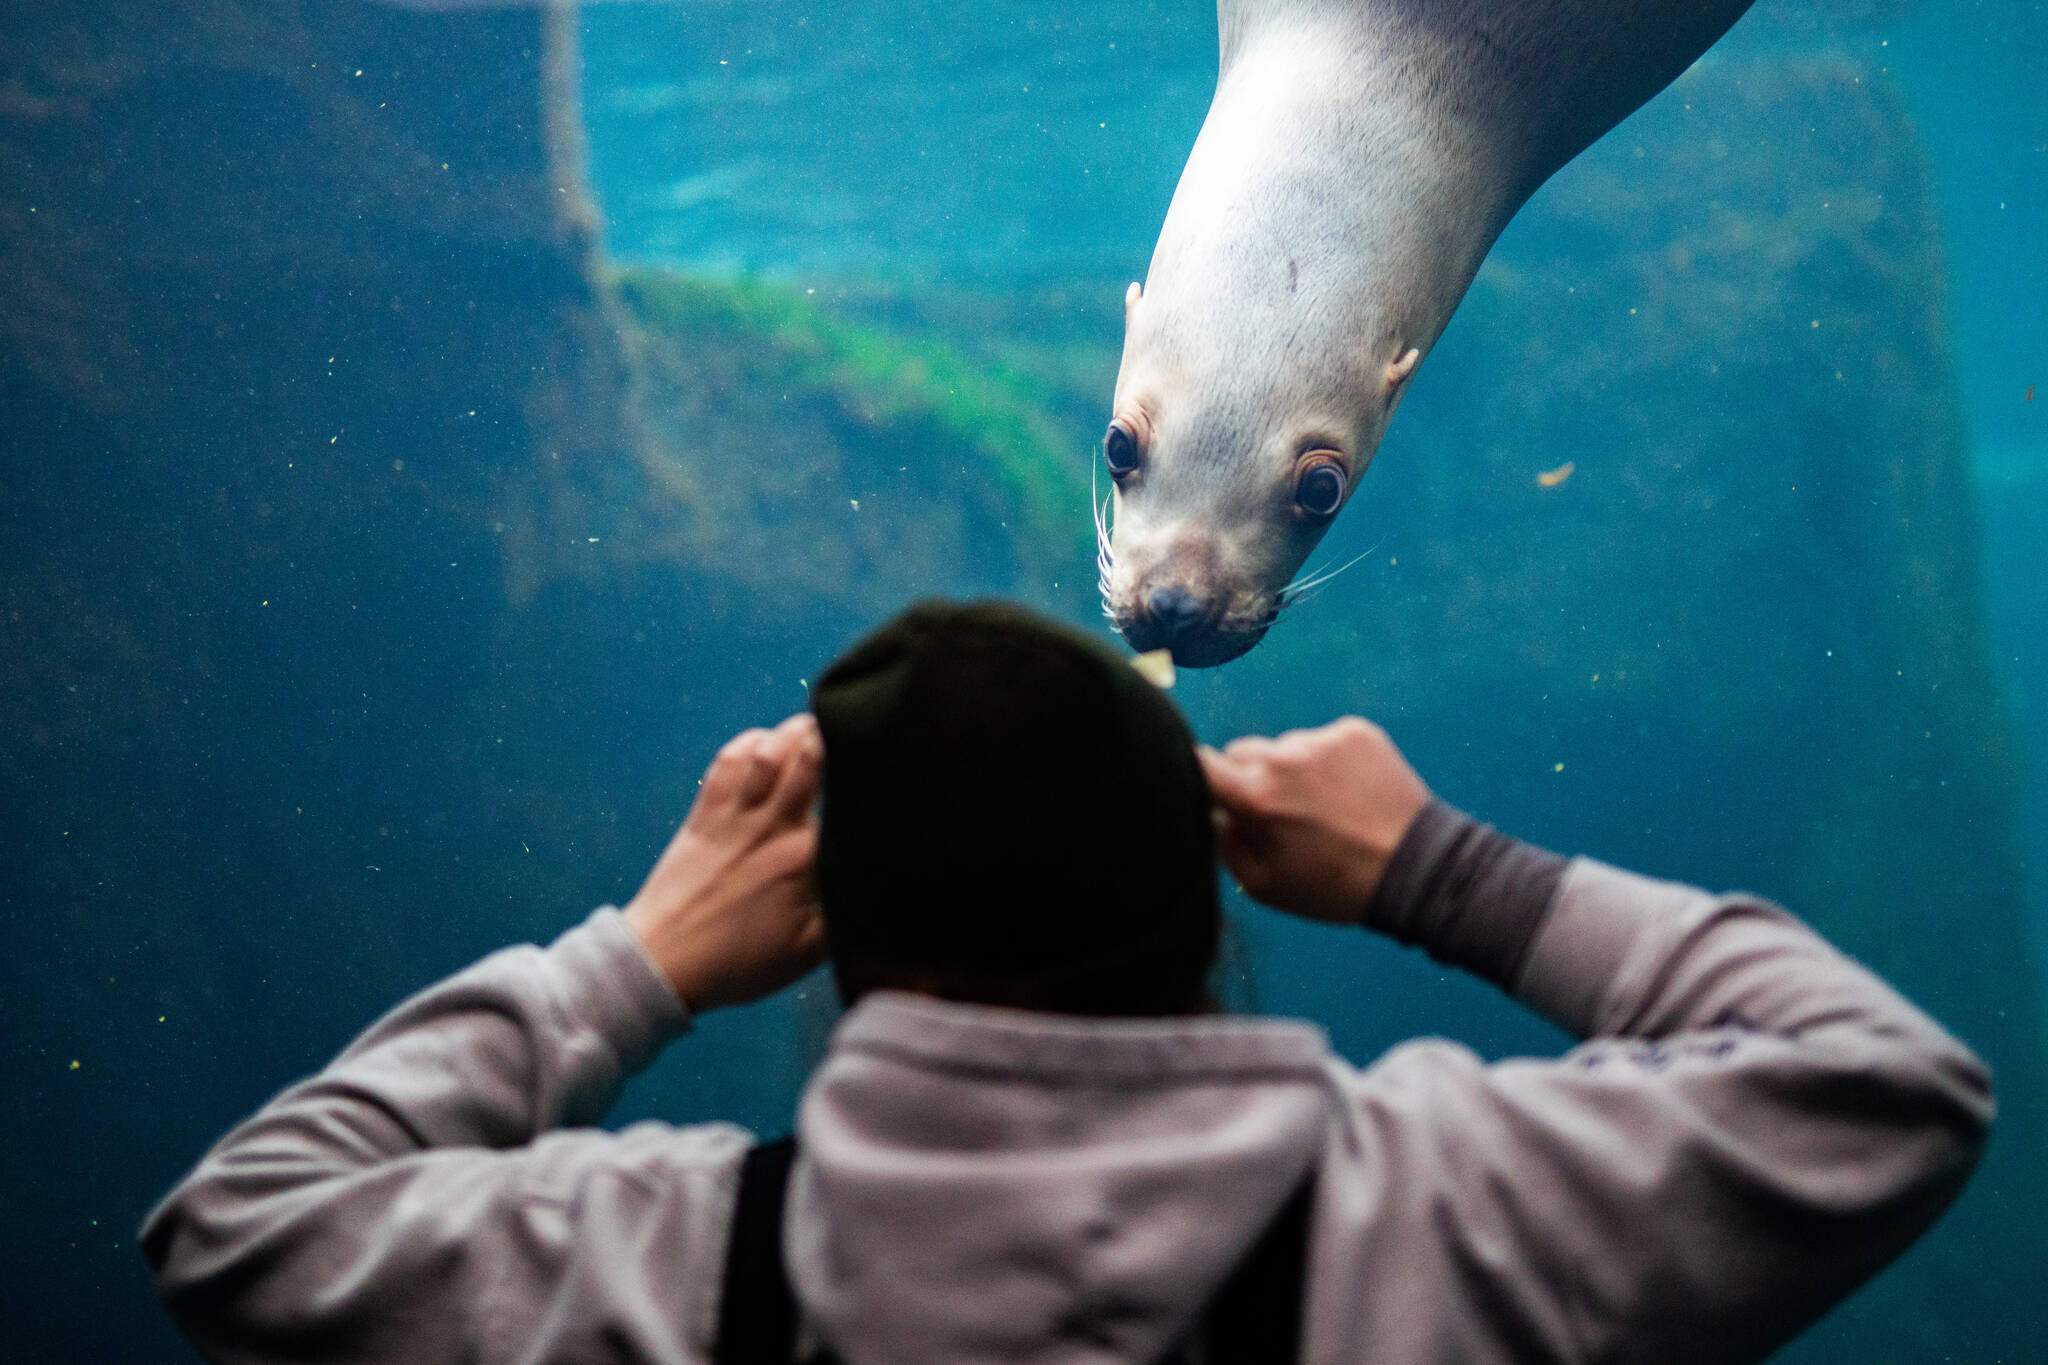 ASLC Seasonal Animal Care Specialist Emma Begalka interacts with Mist the Steller sea lion in the Underwater viewing area at the Alaska SeaLife Center during an enrichment session on November 30, 2022. Mist unexpectedly passed away on January 23, 2023 after staff observed seizure-like tremors. (Photo courtesy Kaiti Grant/Alaska SeaLife Center)